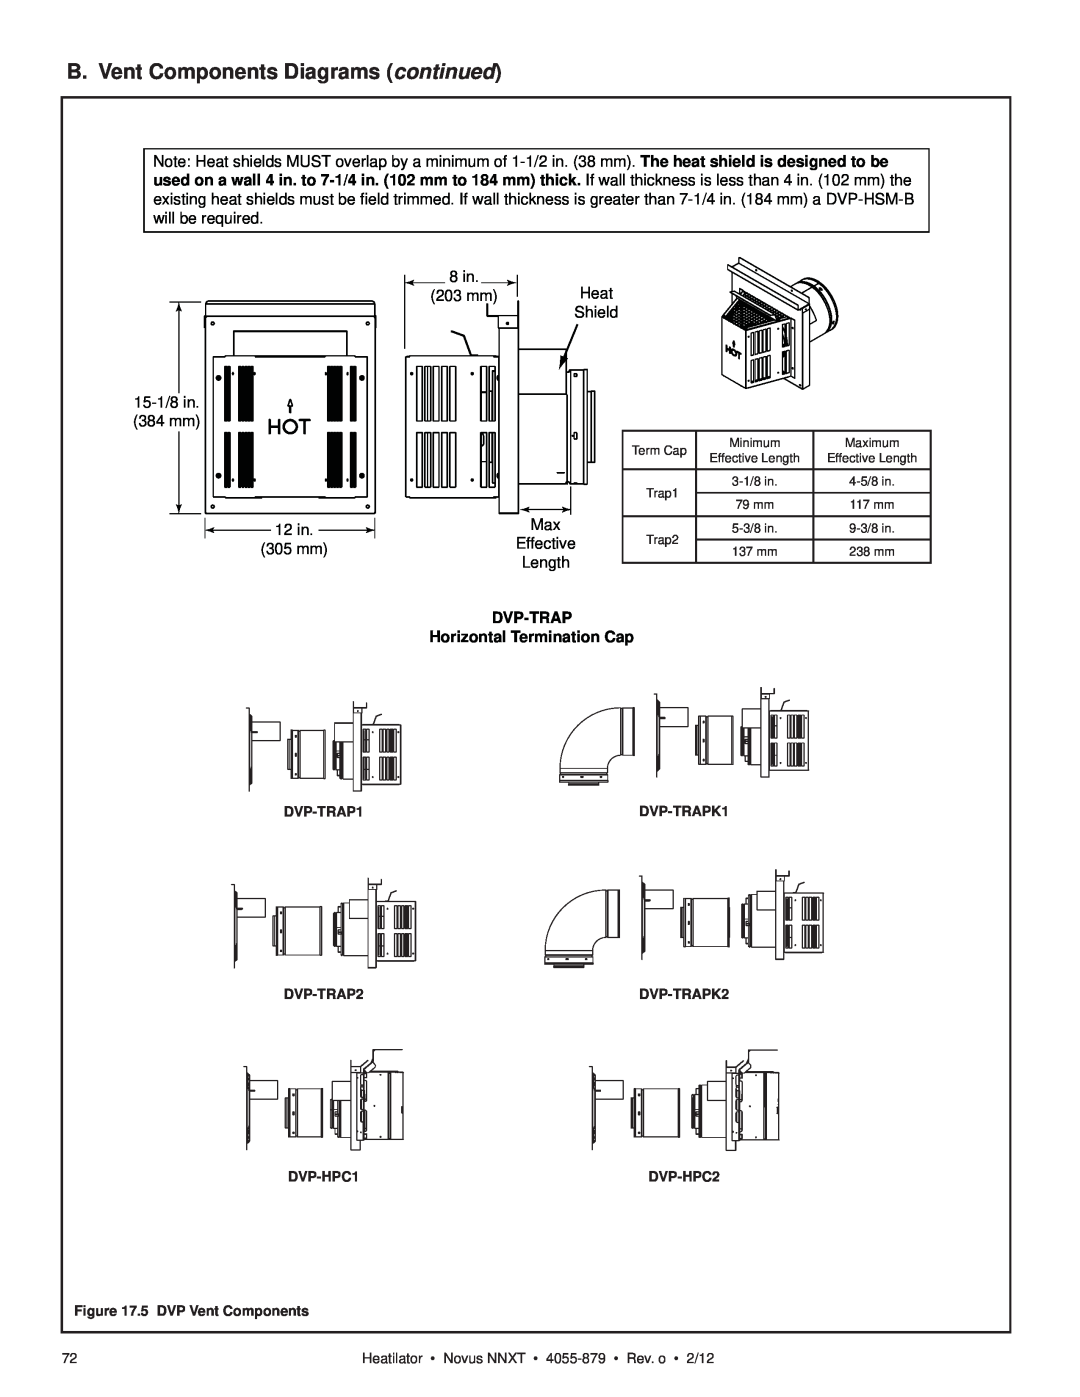 Heatiator NNXT3933IL B. Vent Components Diagrams continued, 15-1/8 in 384 mm 12 in. 305 mm, 8 in 203 mm Heat Shield 